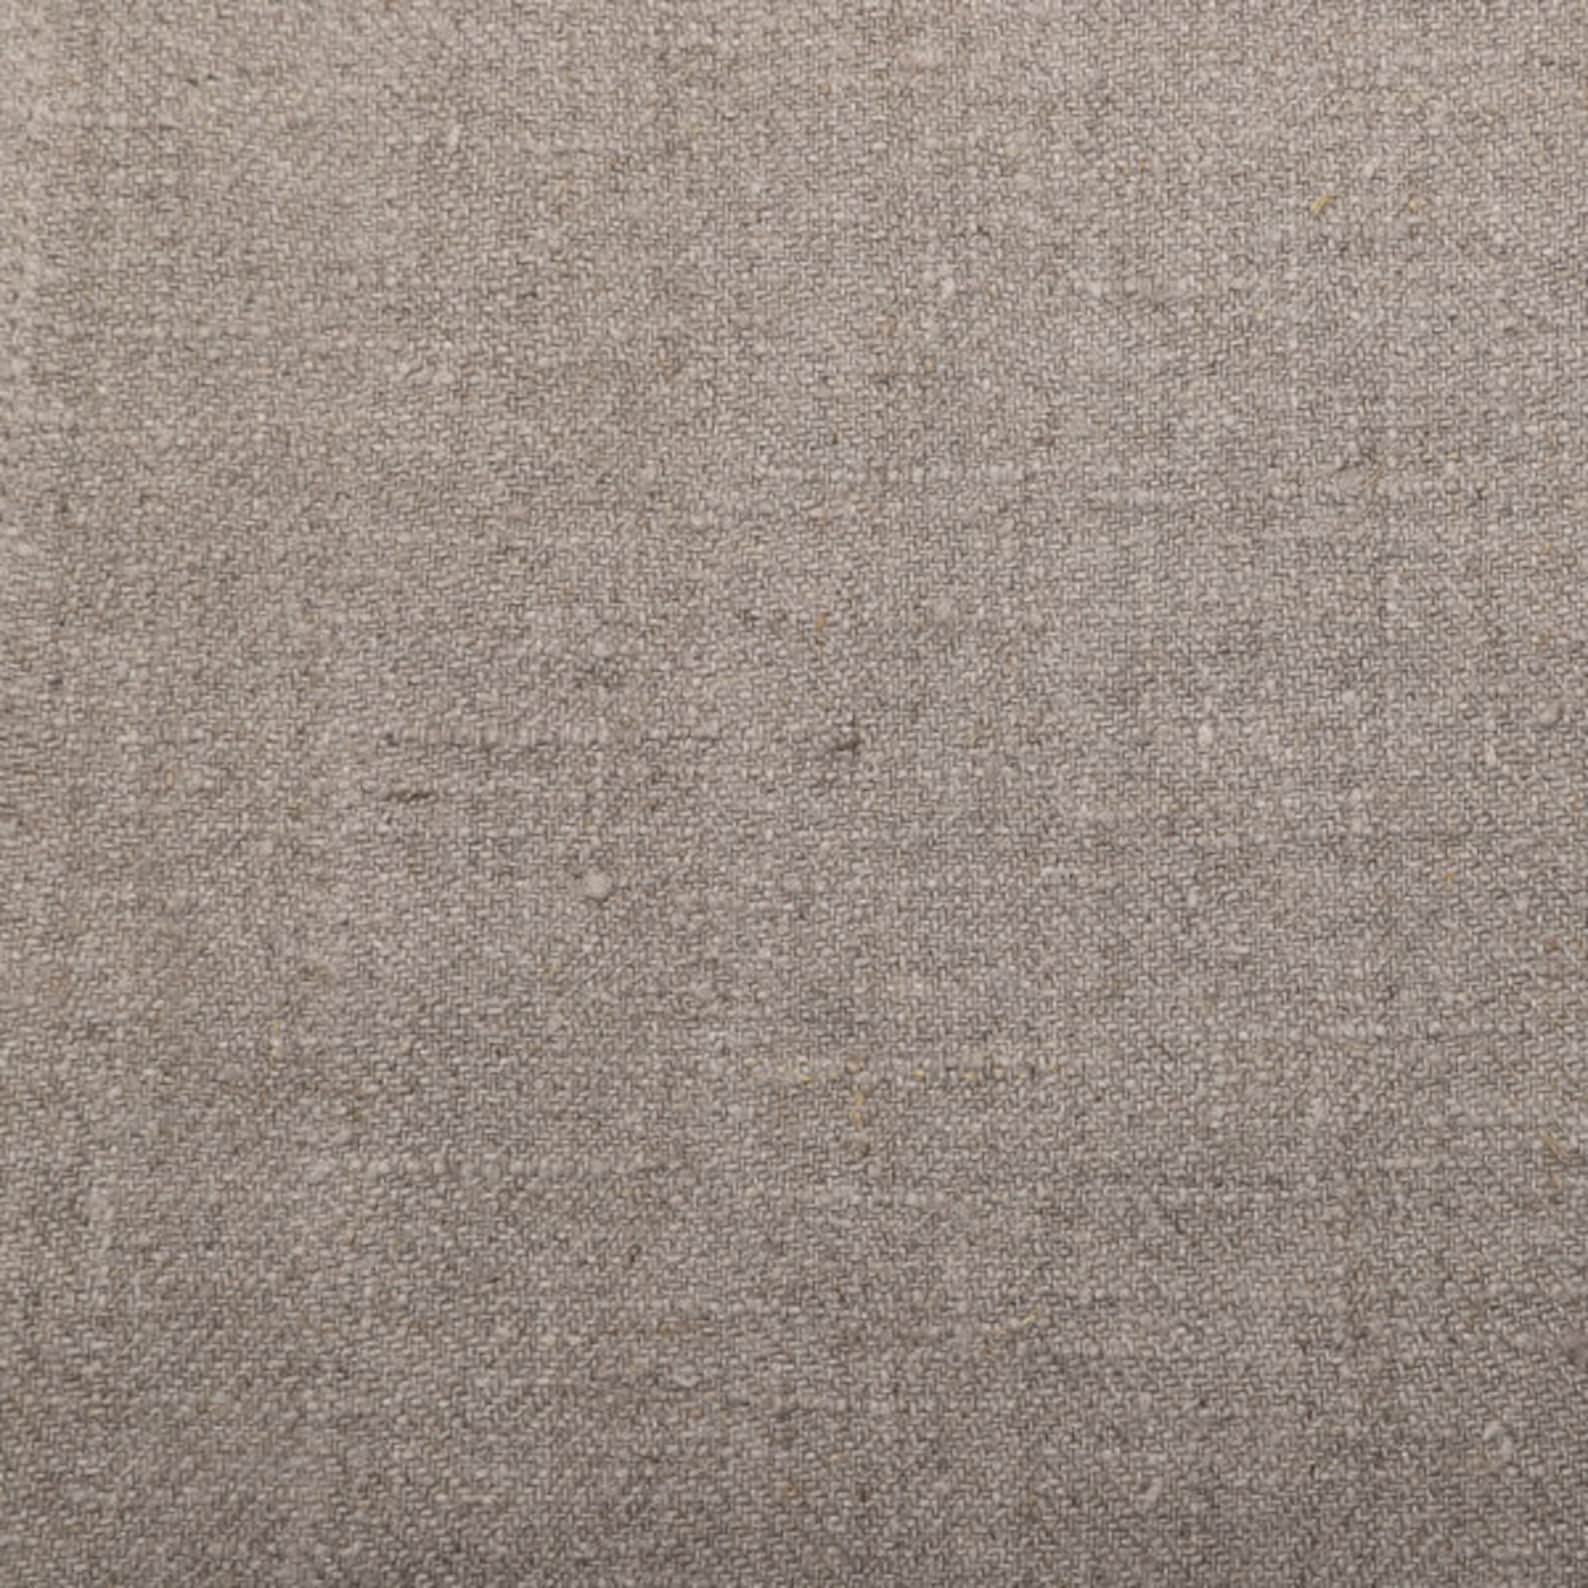 Herringbone Linen fabric by the yard or meter washed heavy | Etsy